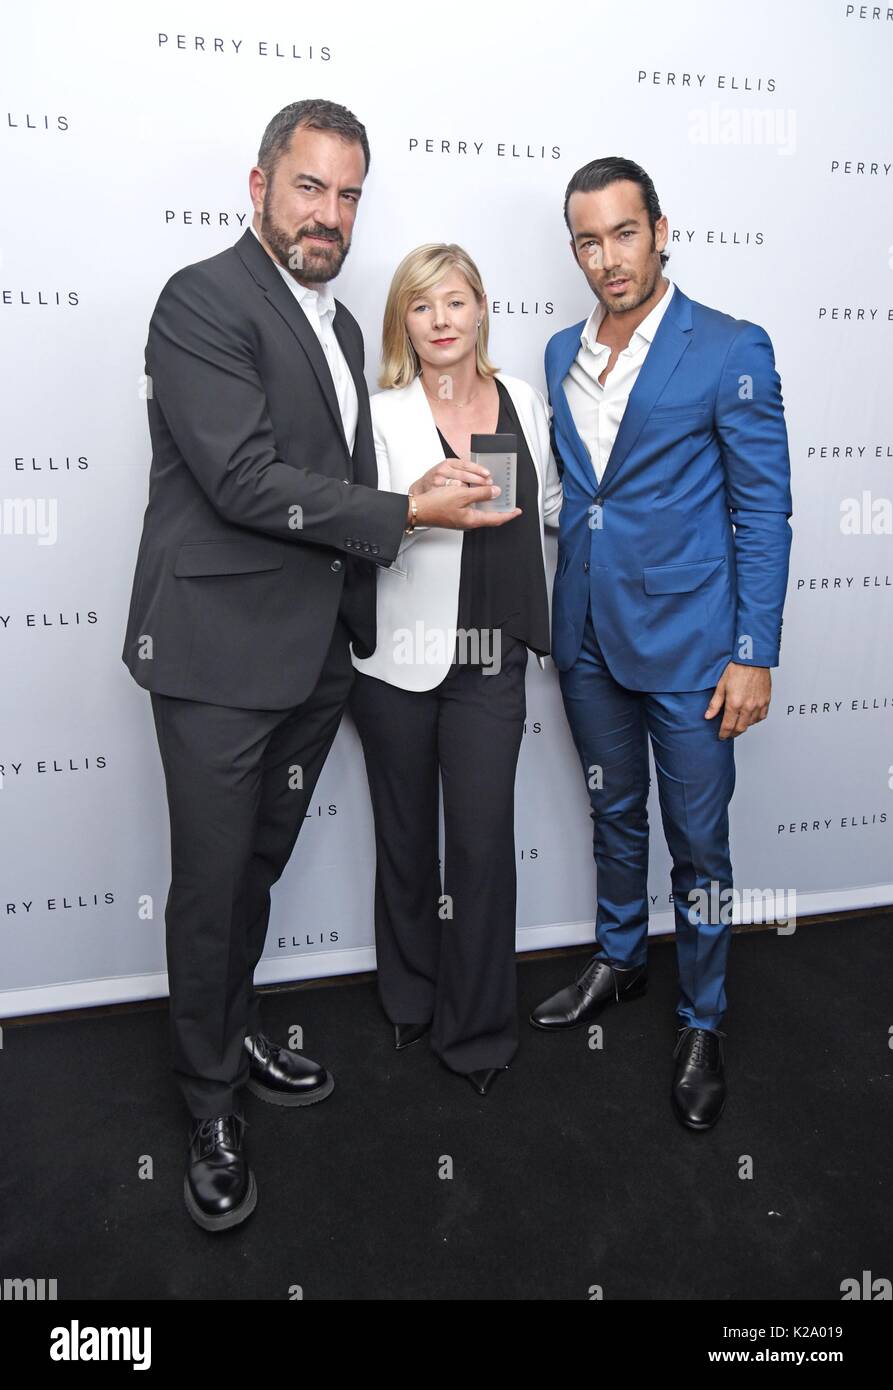 New York, NY, USA. 29th Aug, 2017. Michael Maccari, Creative Director of Perry Ellis, Melissa Worth, Aaron Diaz at arrivals for Perry Ellis Men's Fragrance Launch, Kola House, New York, NY August 29, 2017. Credit: Derek Storm/Everett Collection/Alamy Live News Stock Photo